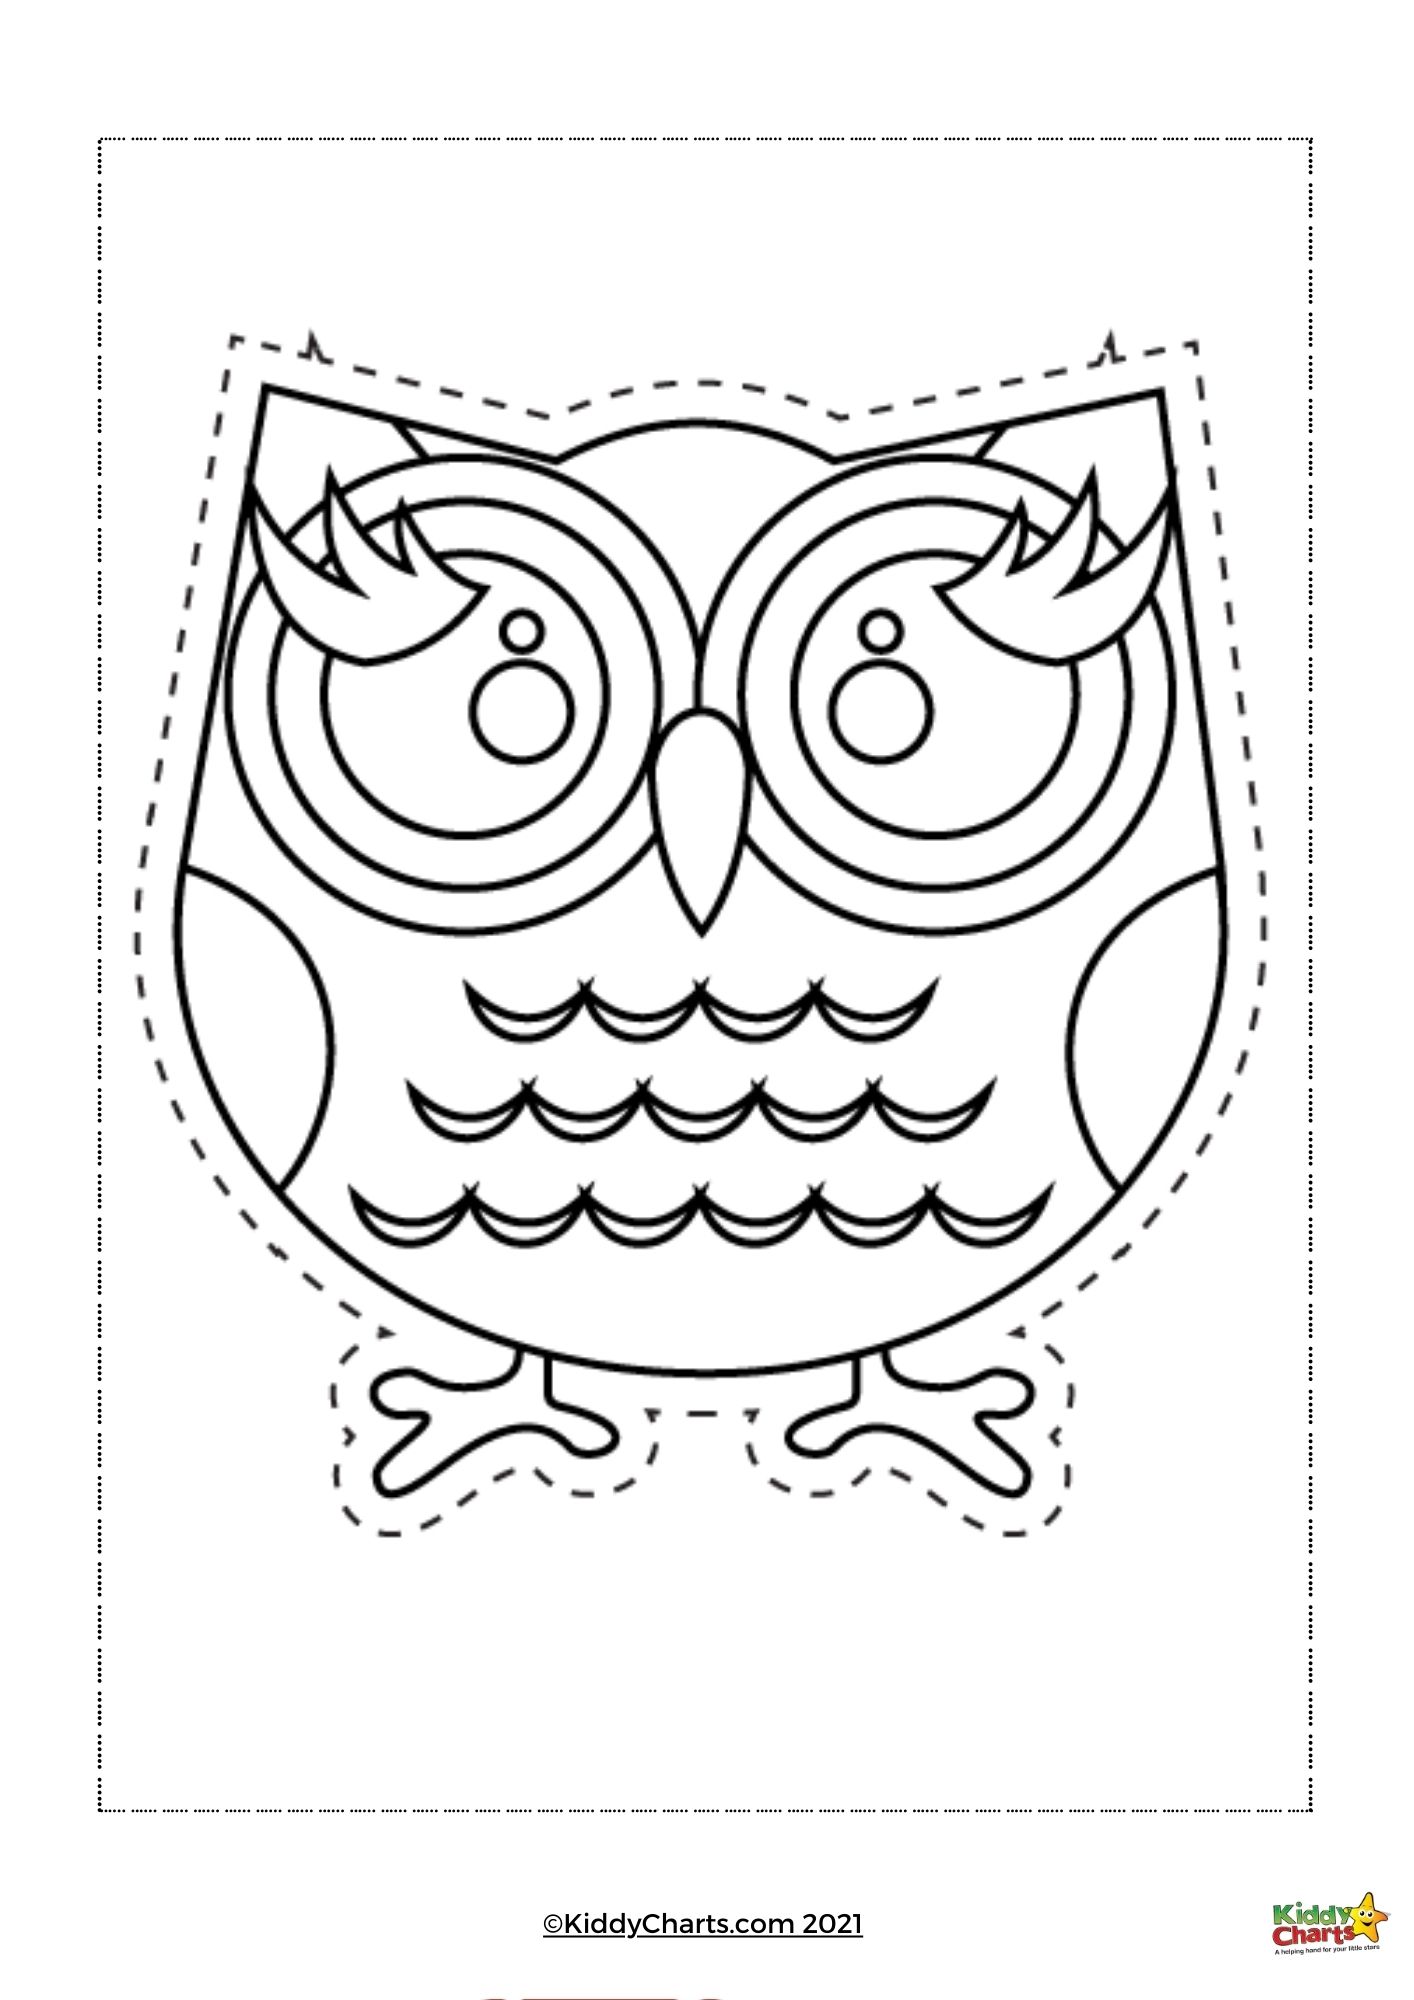 Owl coloring pages cut and colour owls